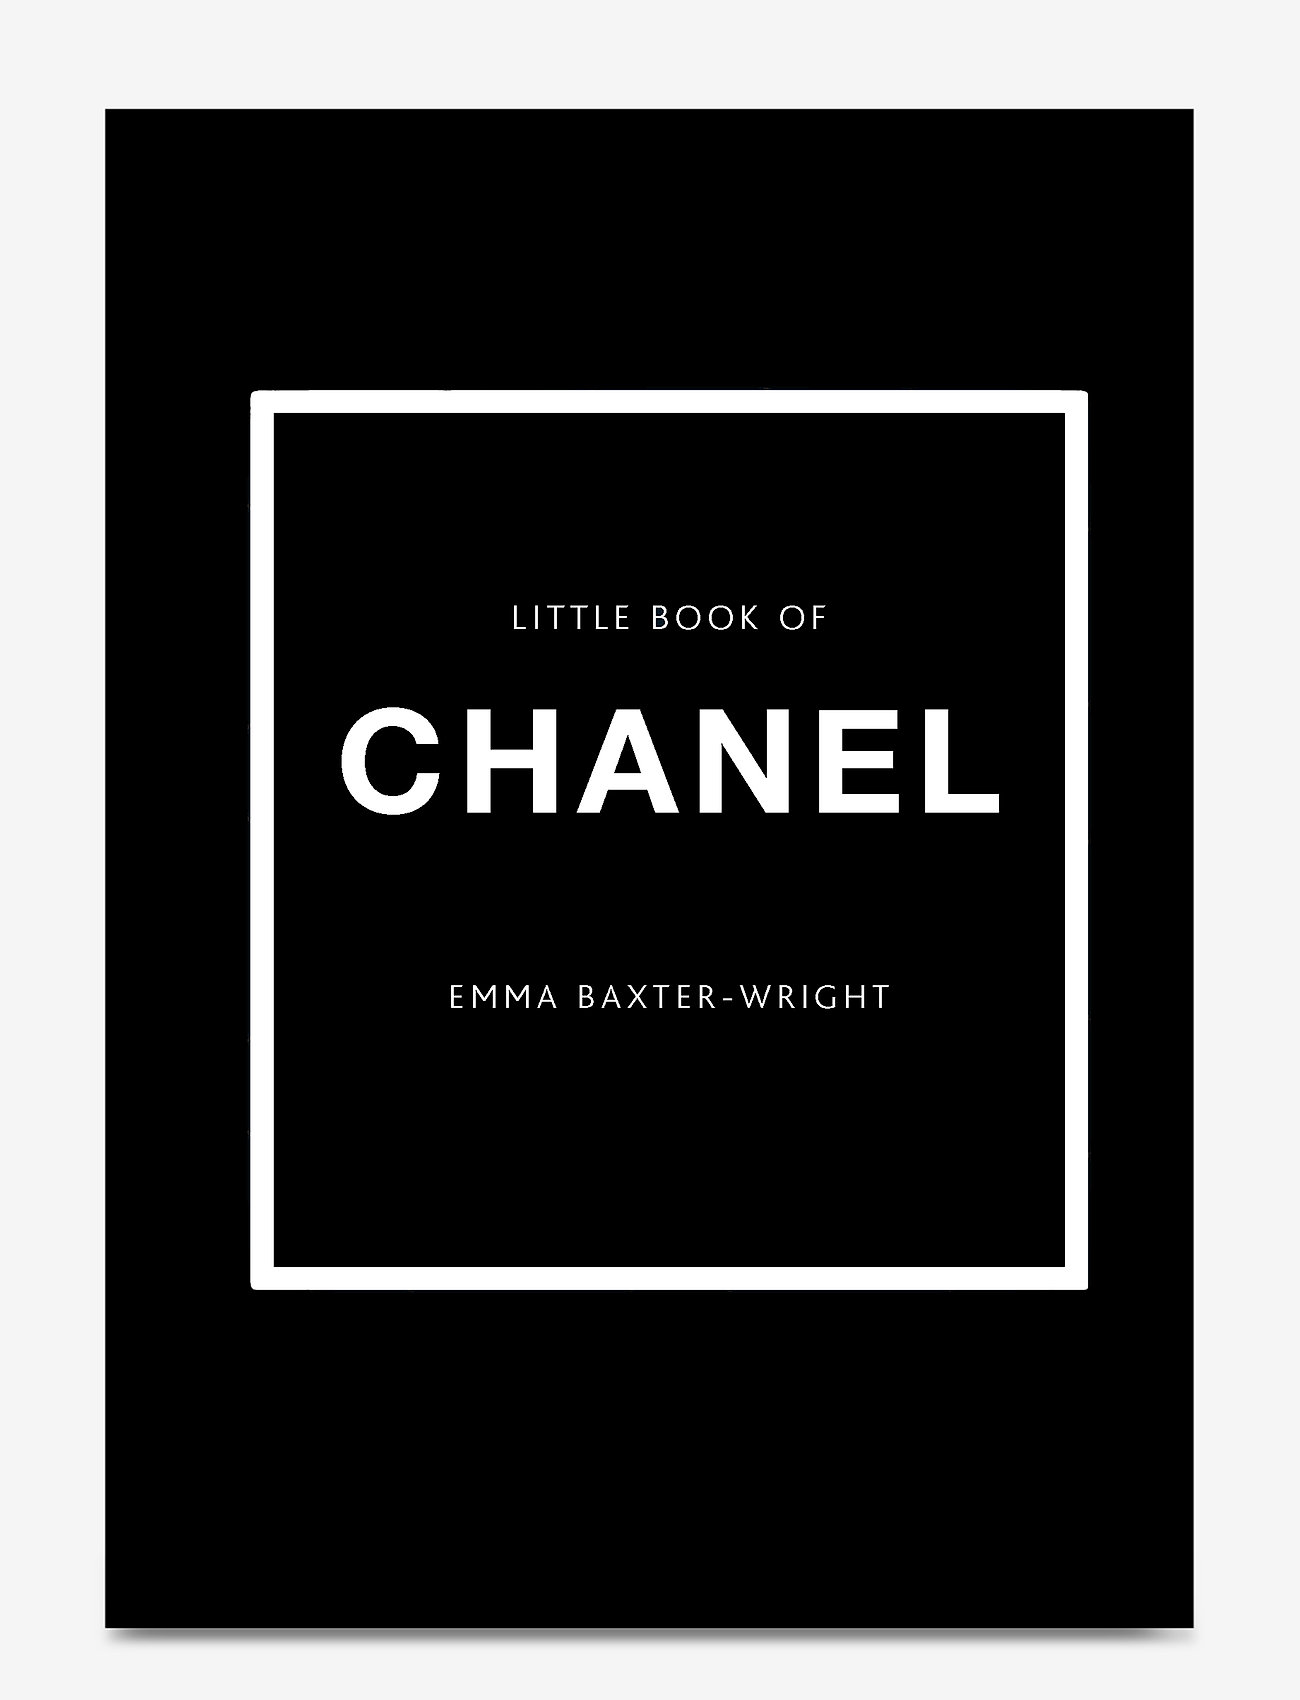 New Mags - The little book of Chanel - köp efter pris - black - 0